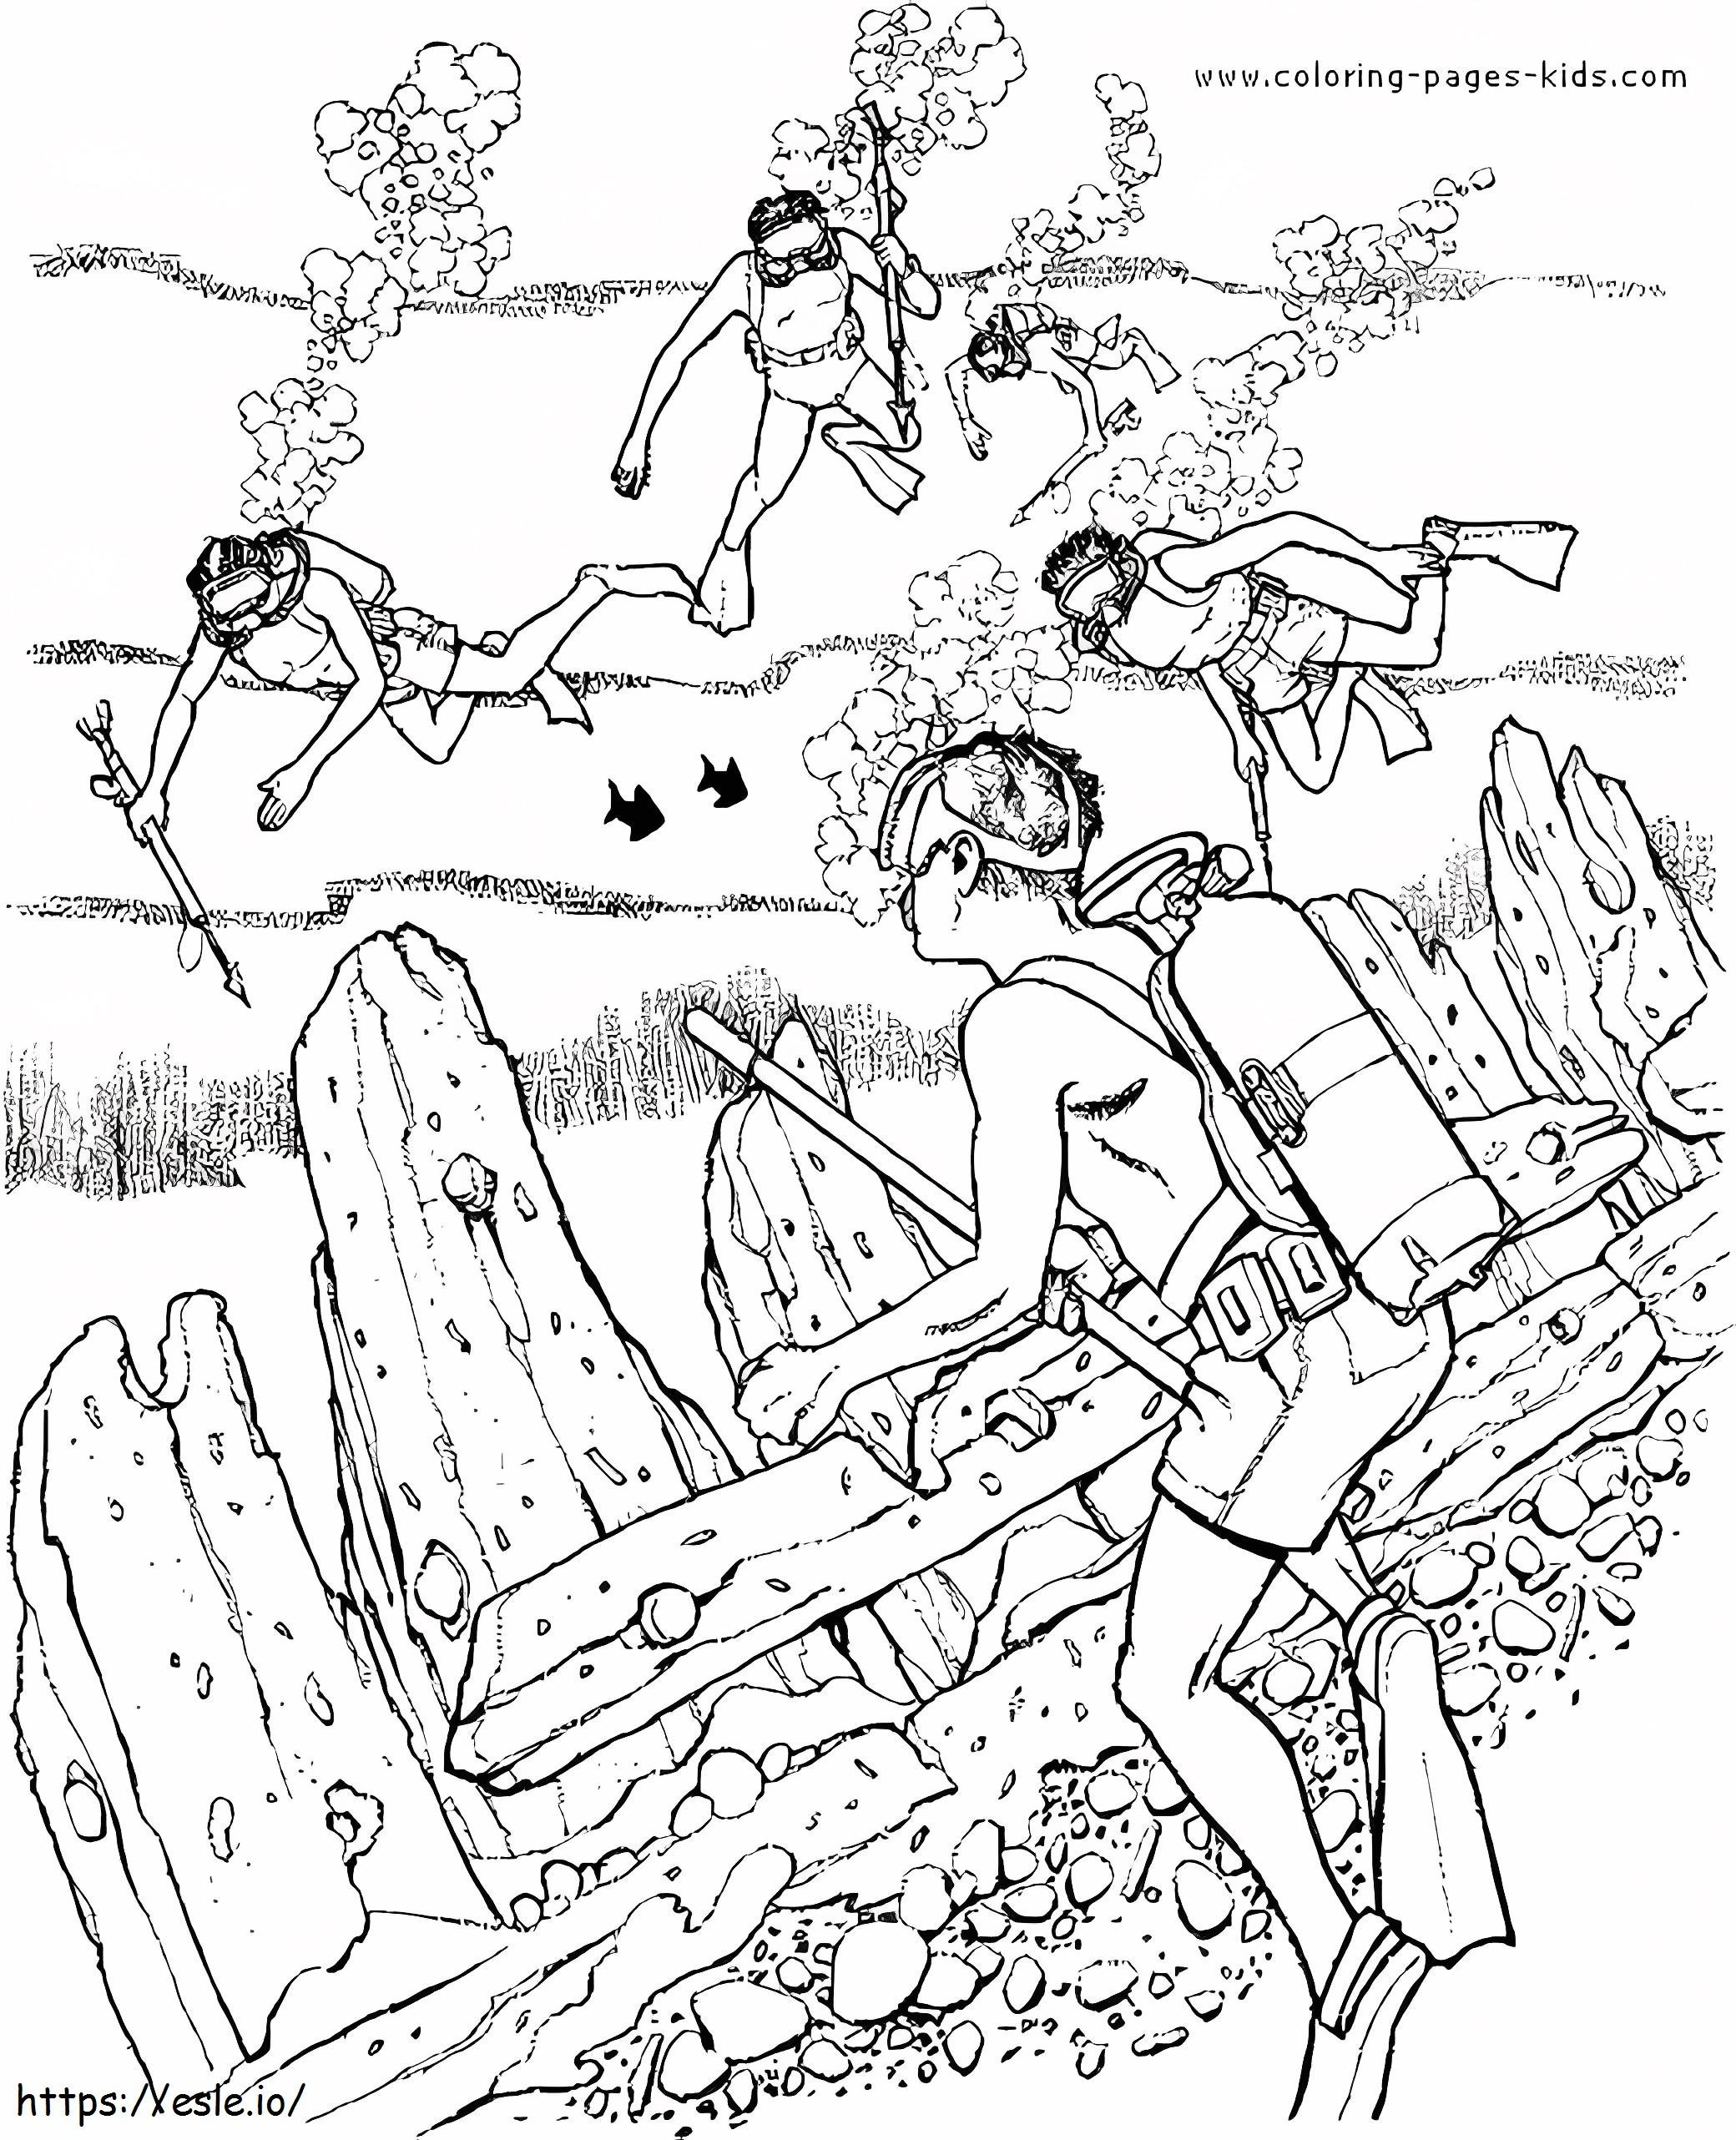 Five People Diving coloring page